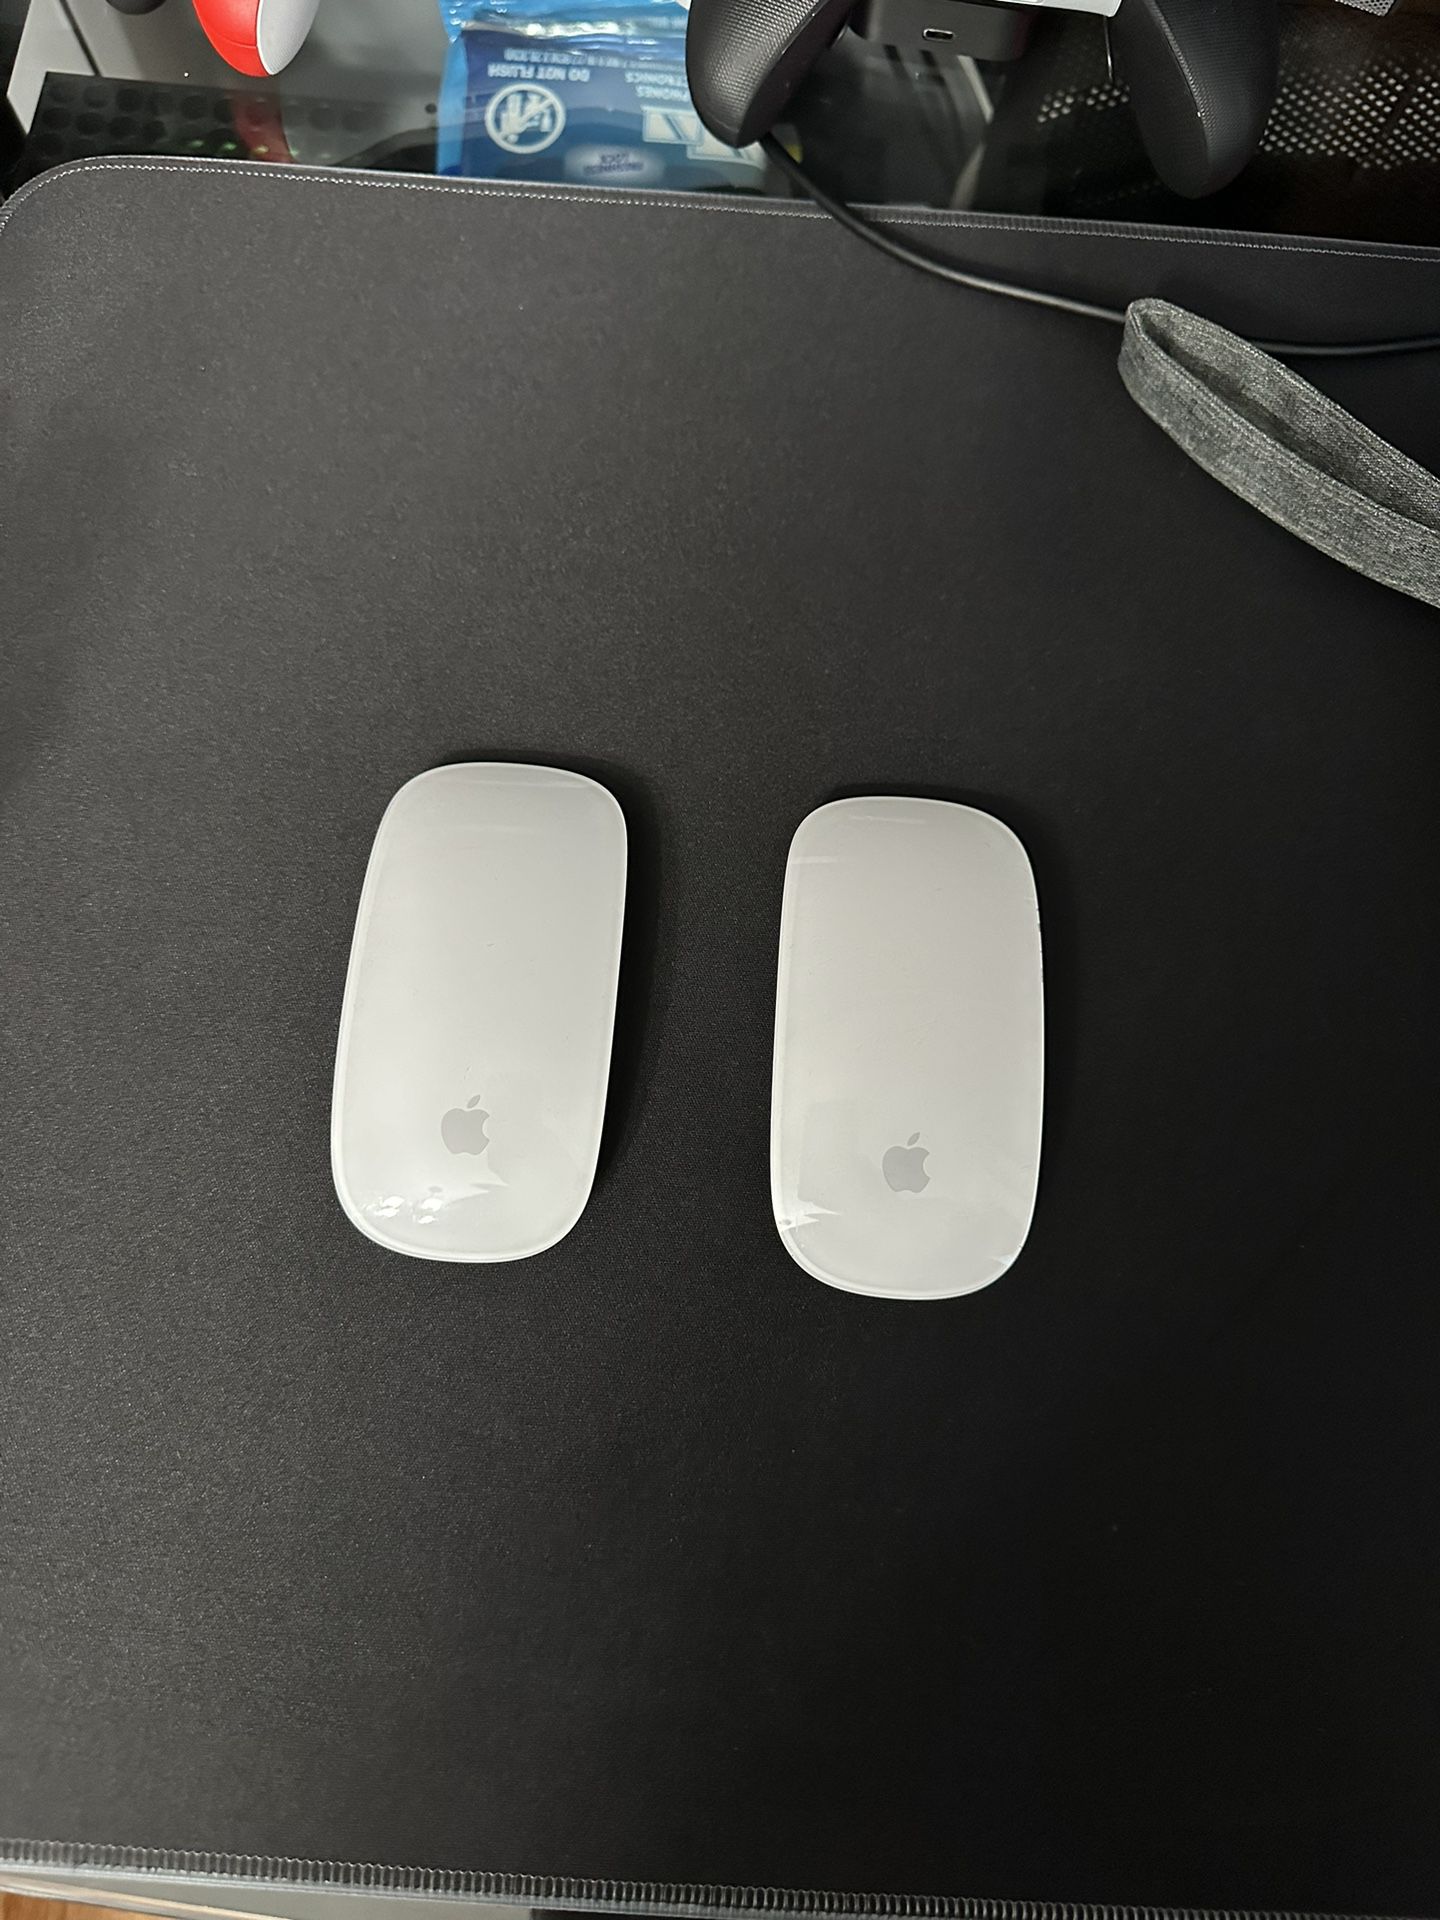 2 Apple Wireless Mouse Magic Mouse 